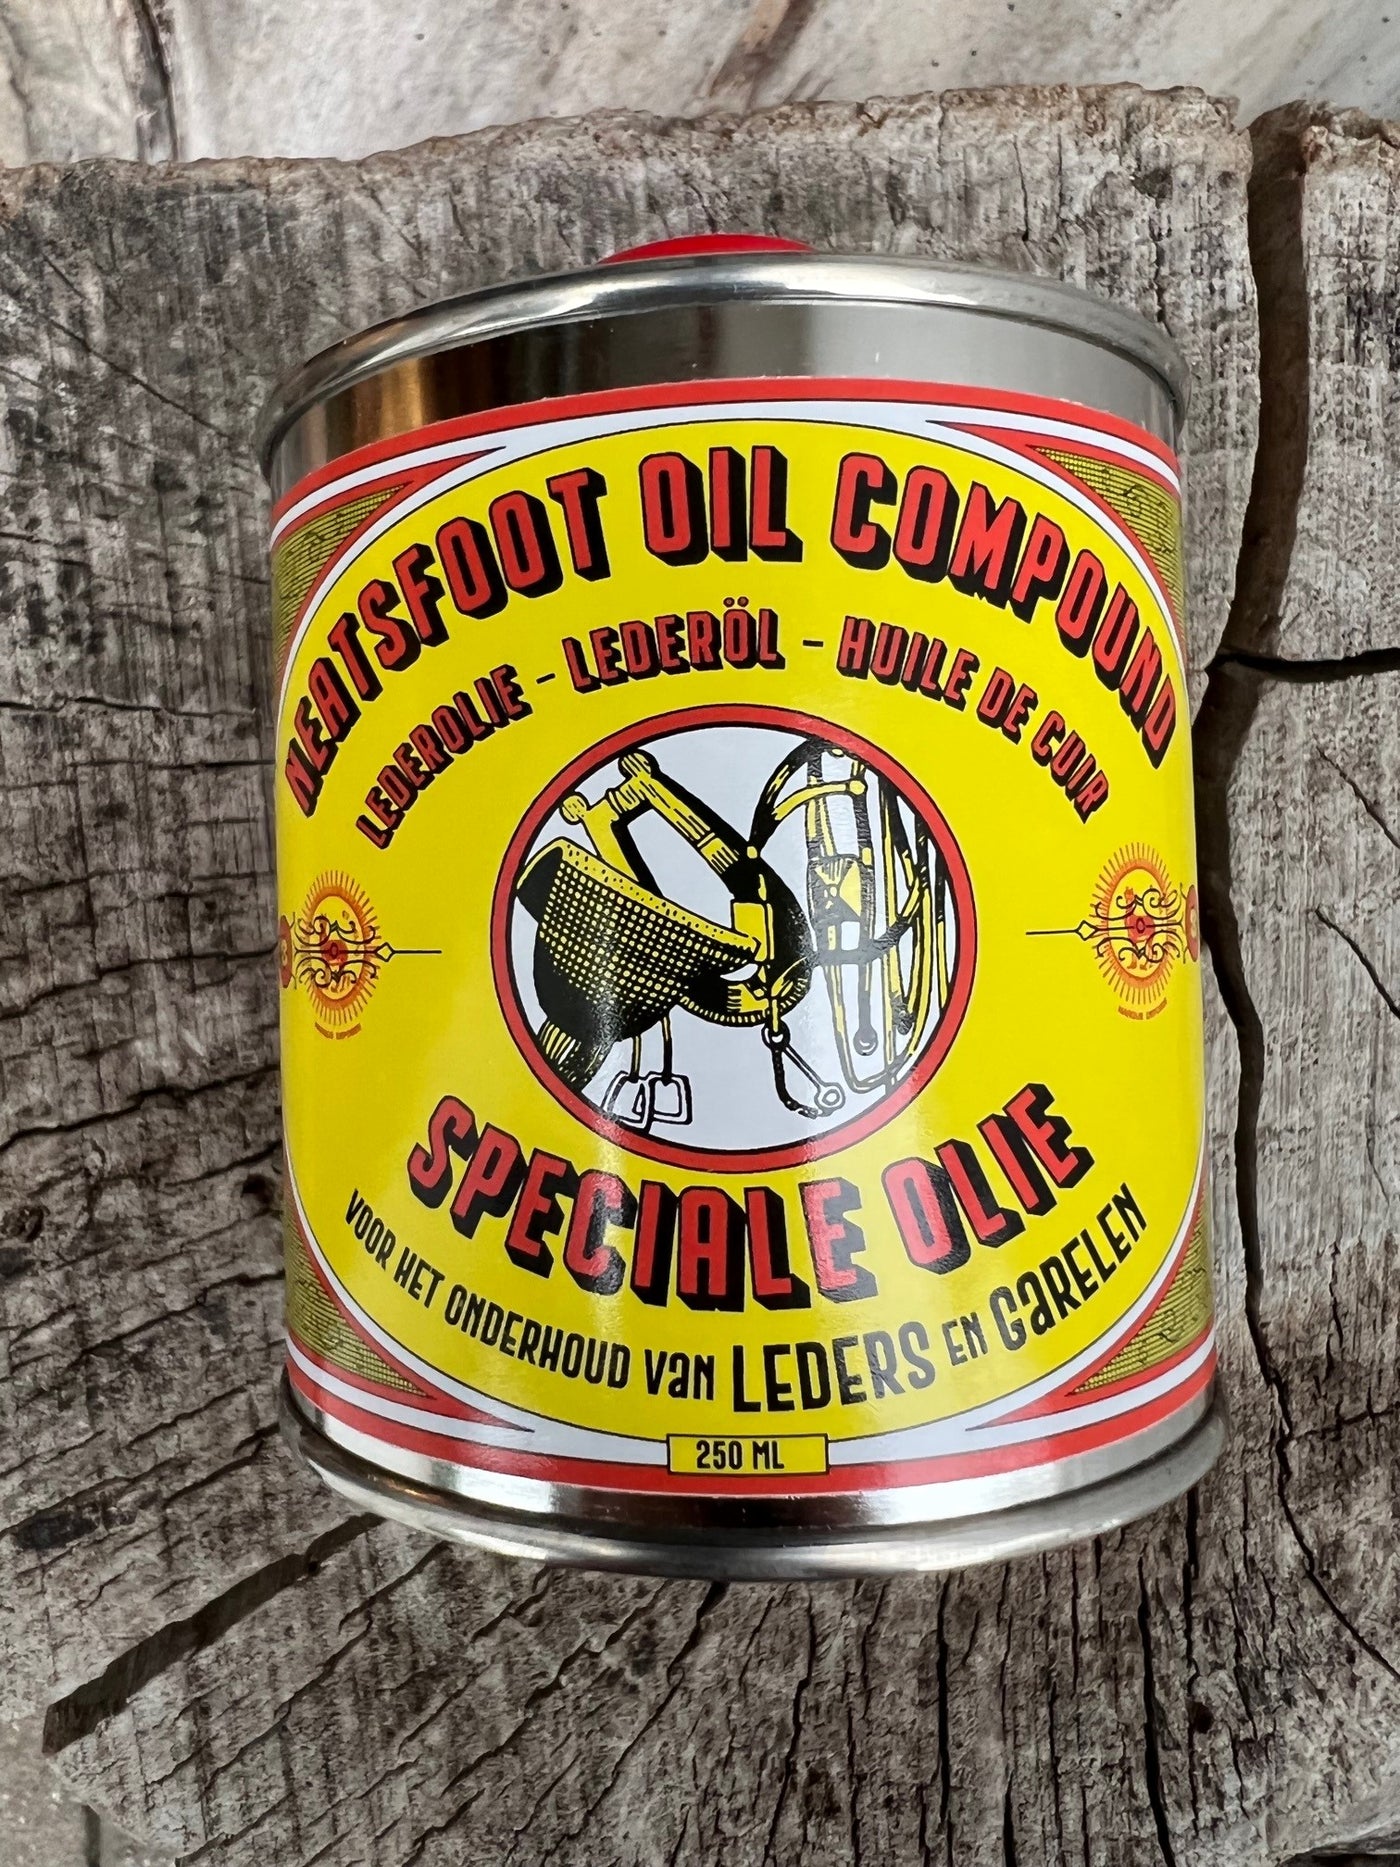 Neatsfoot oil compound